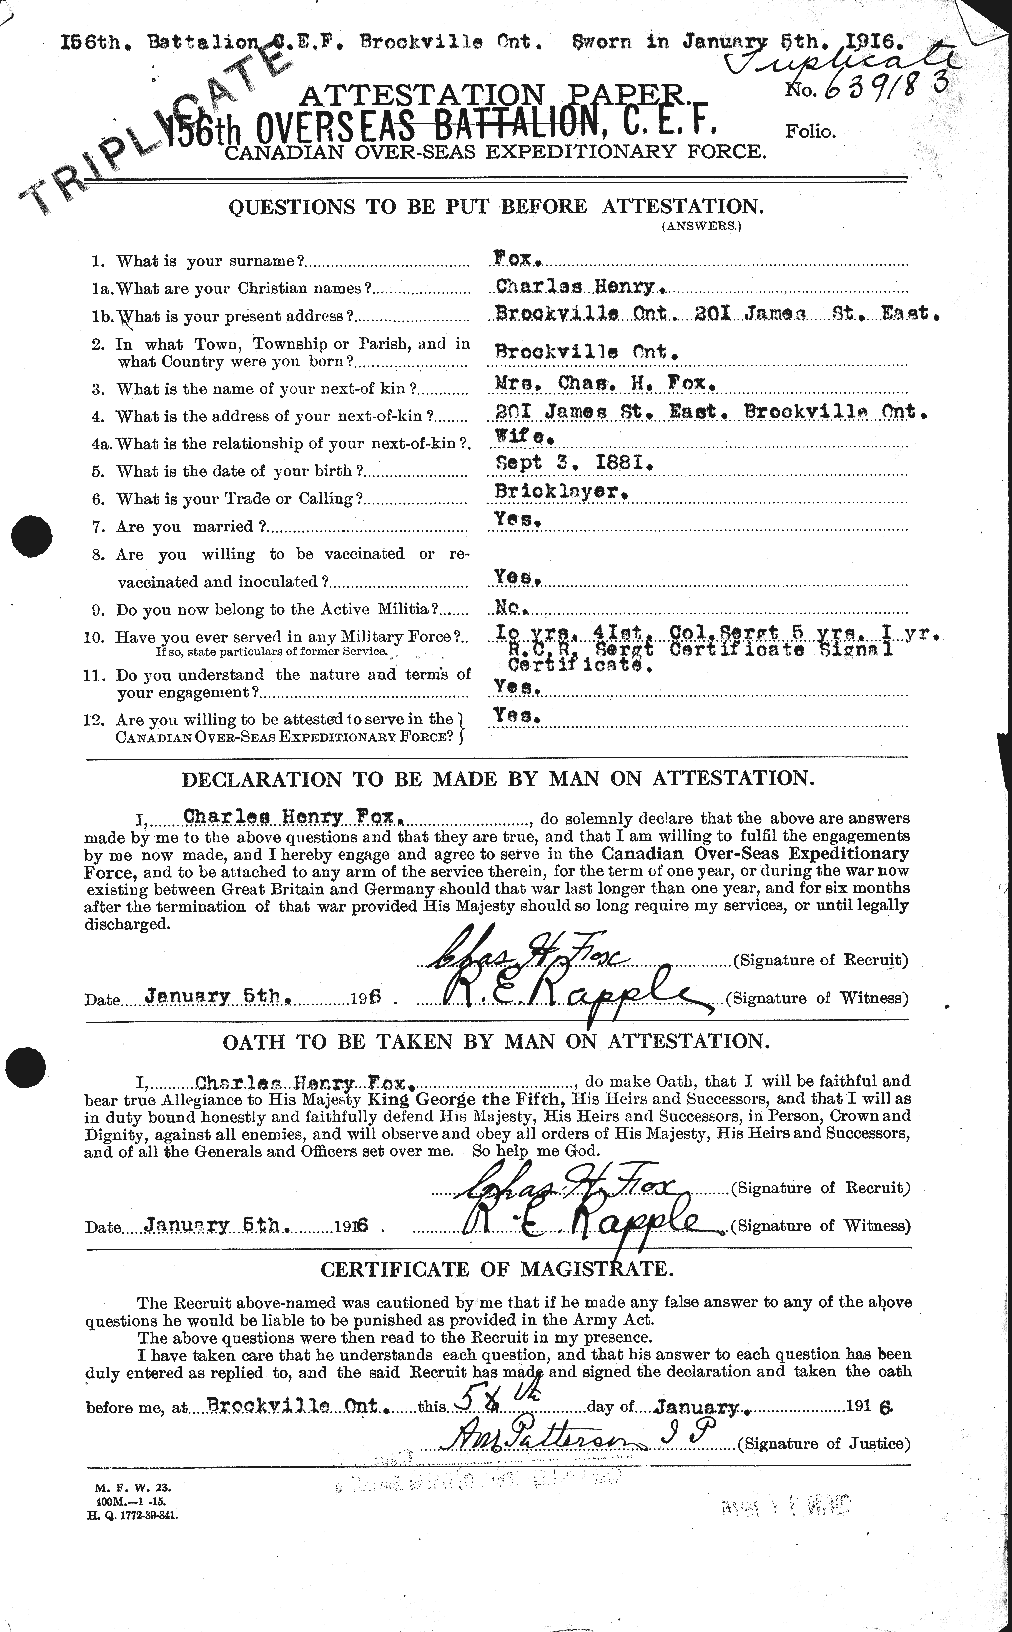 Personnel Records of the First World War - CEF 331254a